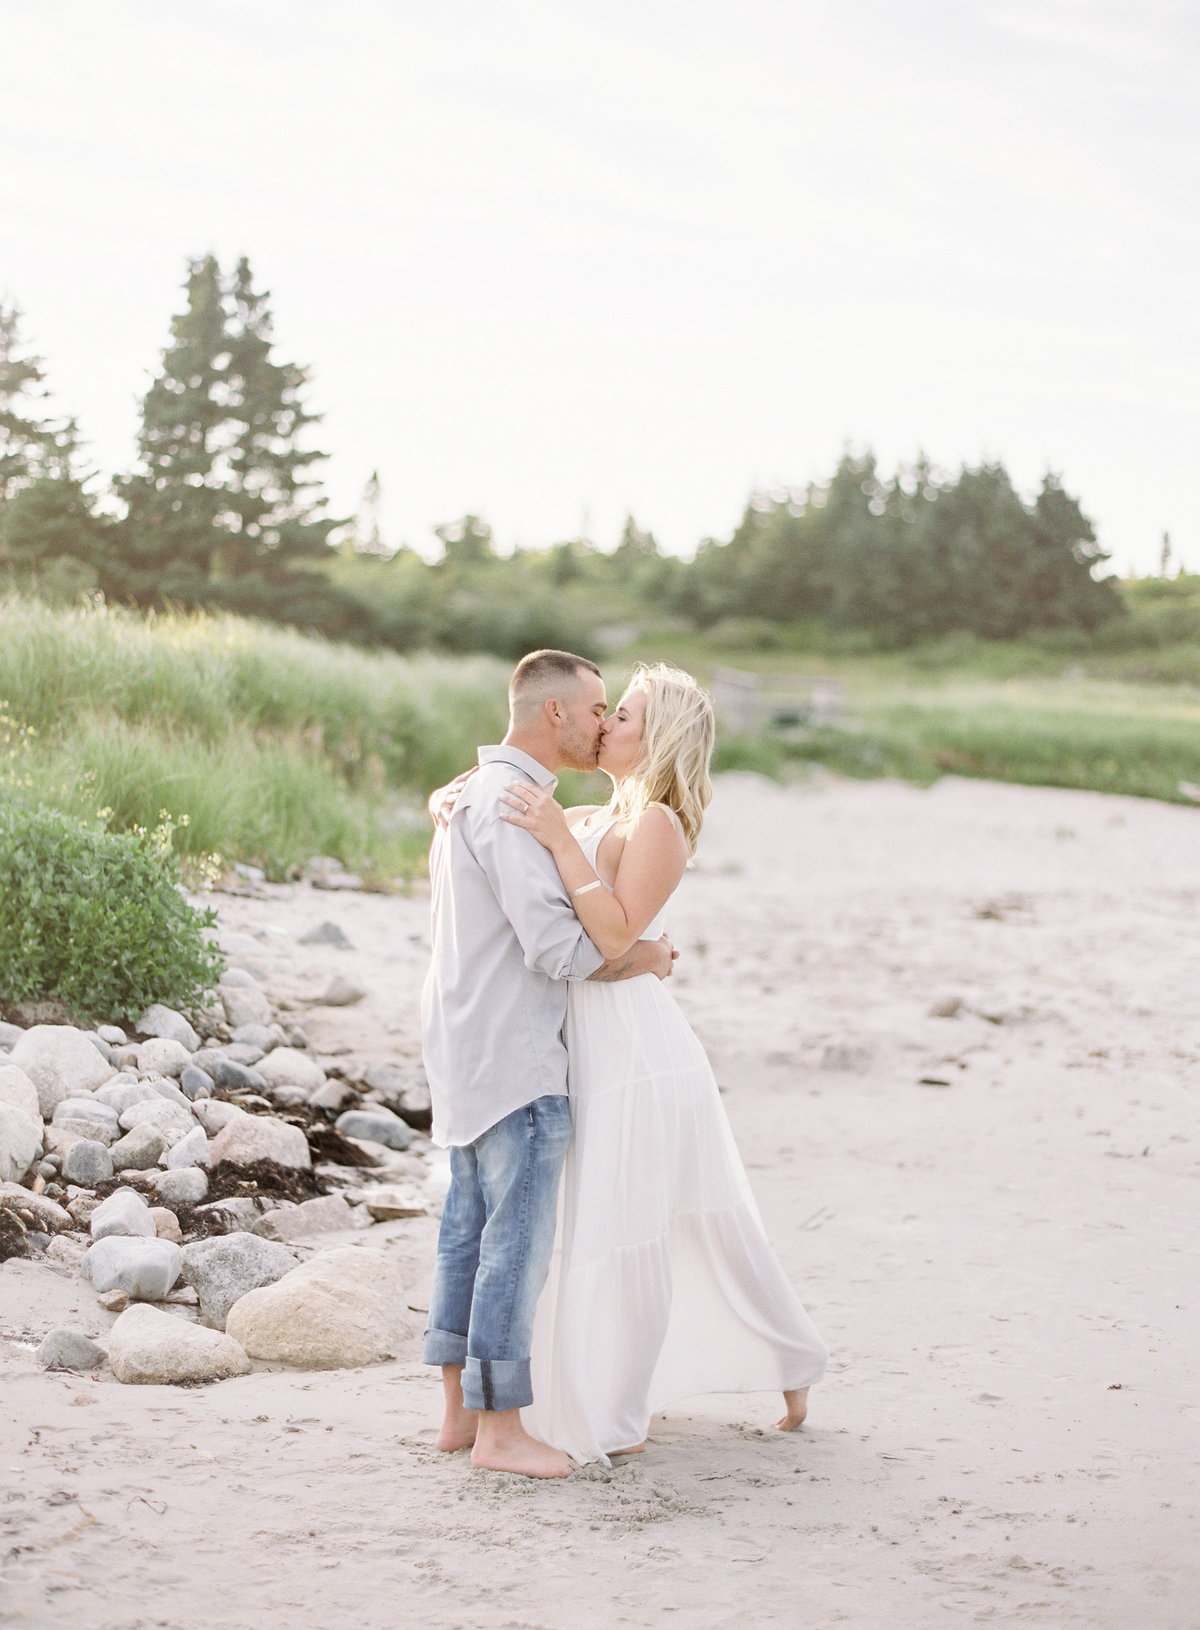 Jacqueline Anne Photography  - Hailey and Shea - Crystal Crescent Beach Engagement-55